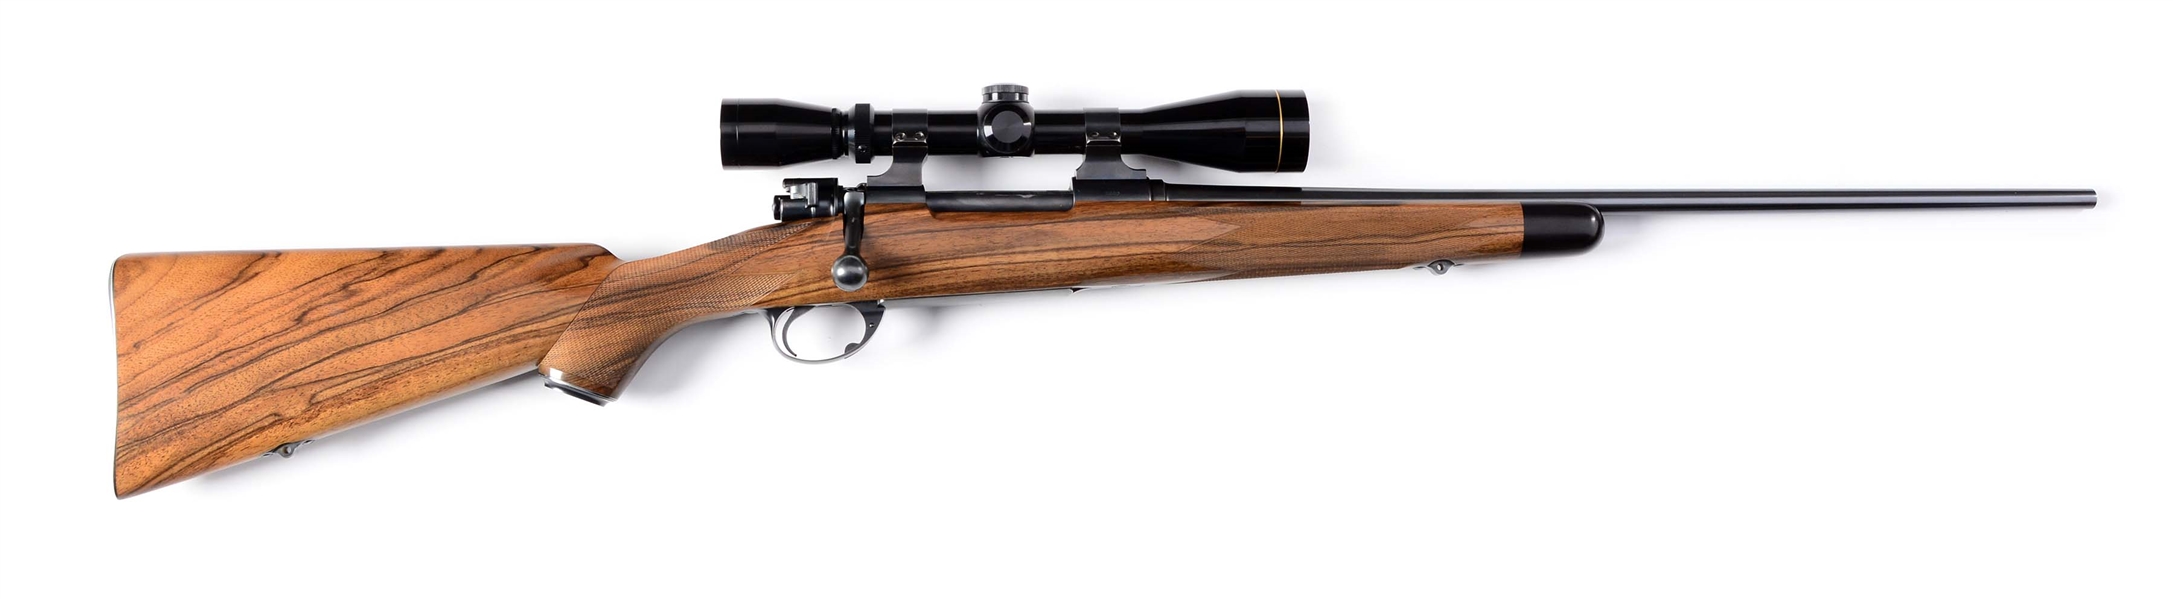 (M) FINELY CRAFTED CUSTOM MAUSER SPORTING RIFLE BY JOE SMITHSON & STEVE BILLEB ON  G33 / 40 ACTION WITH SCOPE.